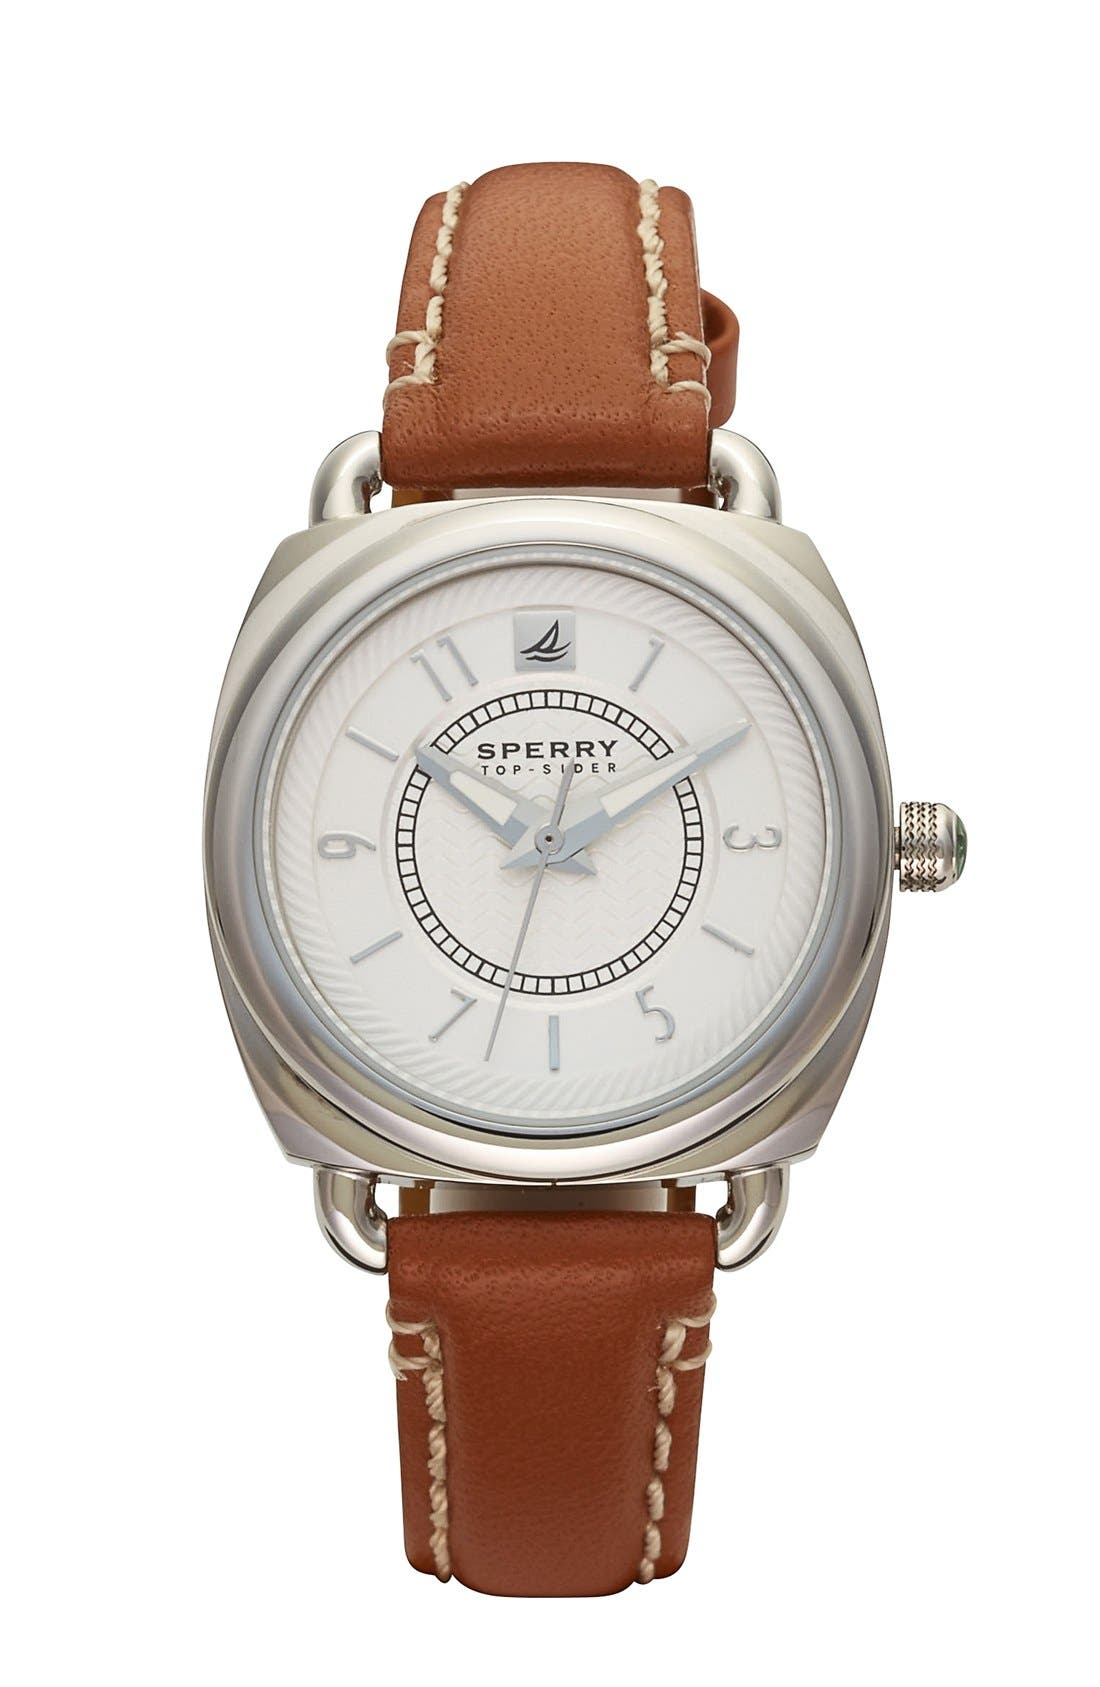 sperry top sider watch